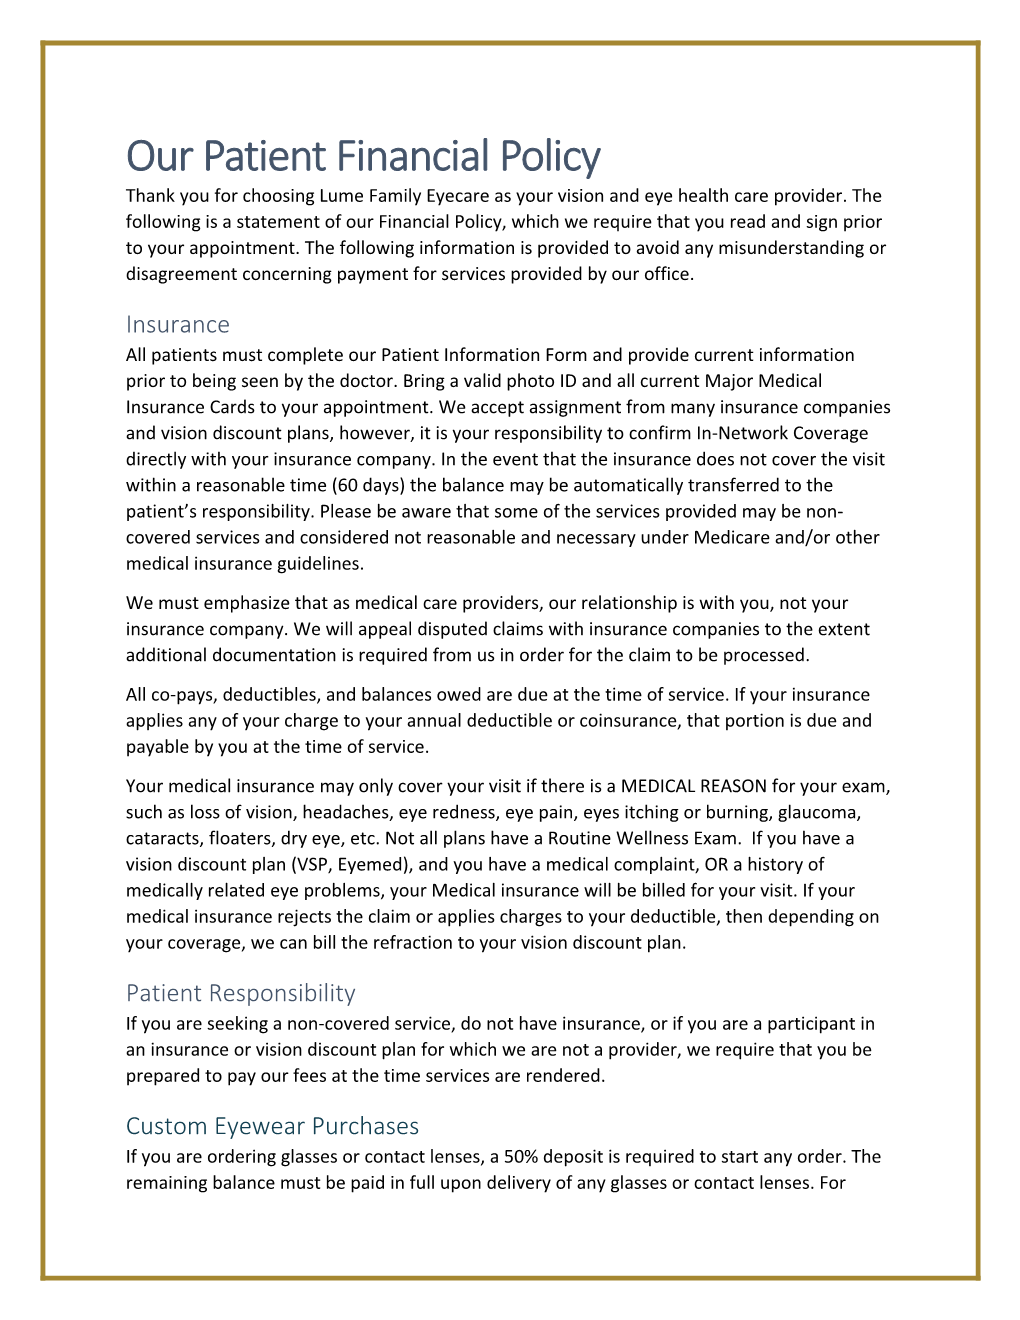 Our Patient Financial Policy